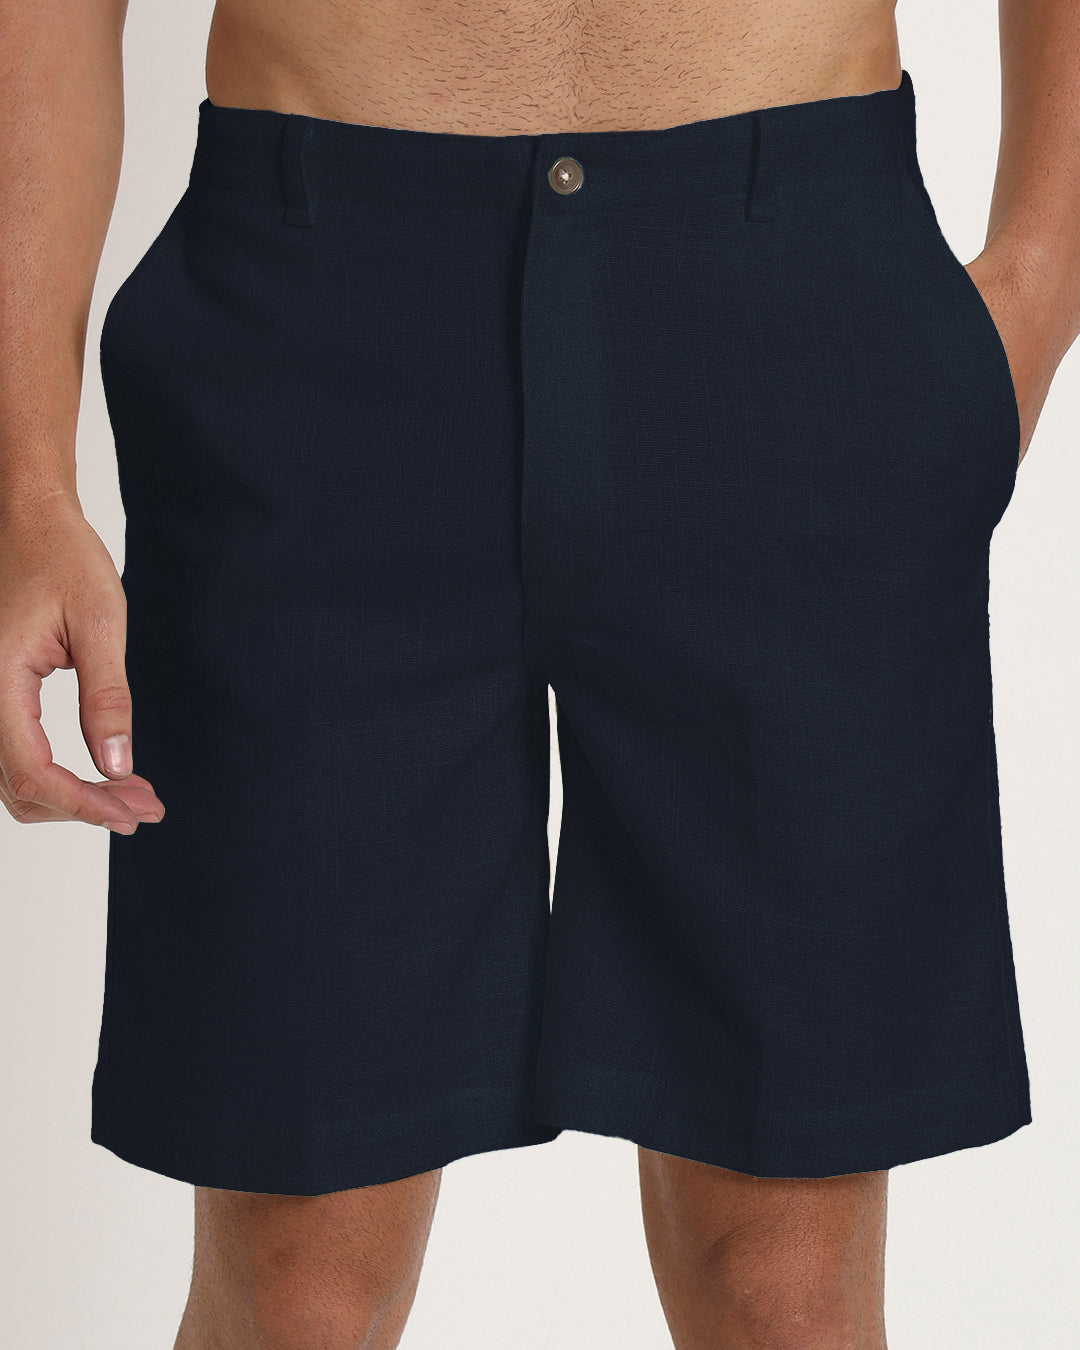 Ready For Anything Midnight Blue Men's Shorts